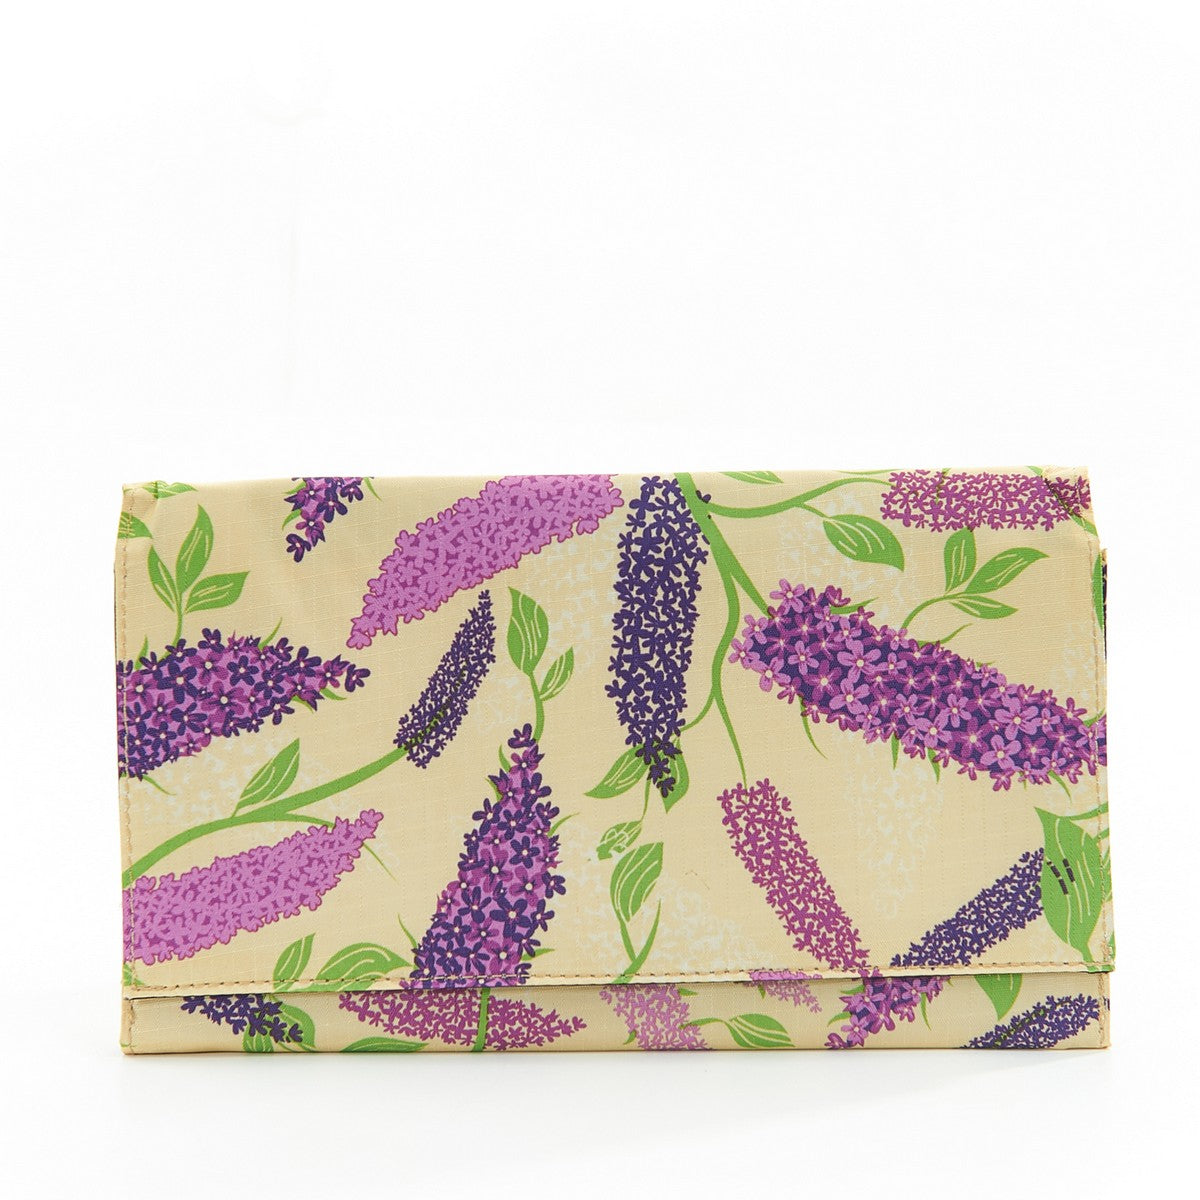 Travel Document Wallet by Eco Chic Waterproof & Durable Fabric Buddleia Design - Beige